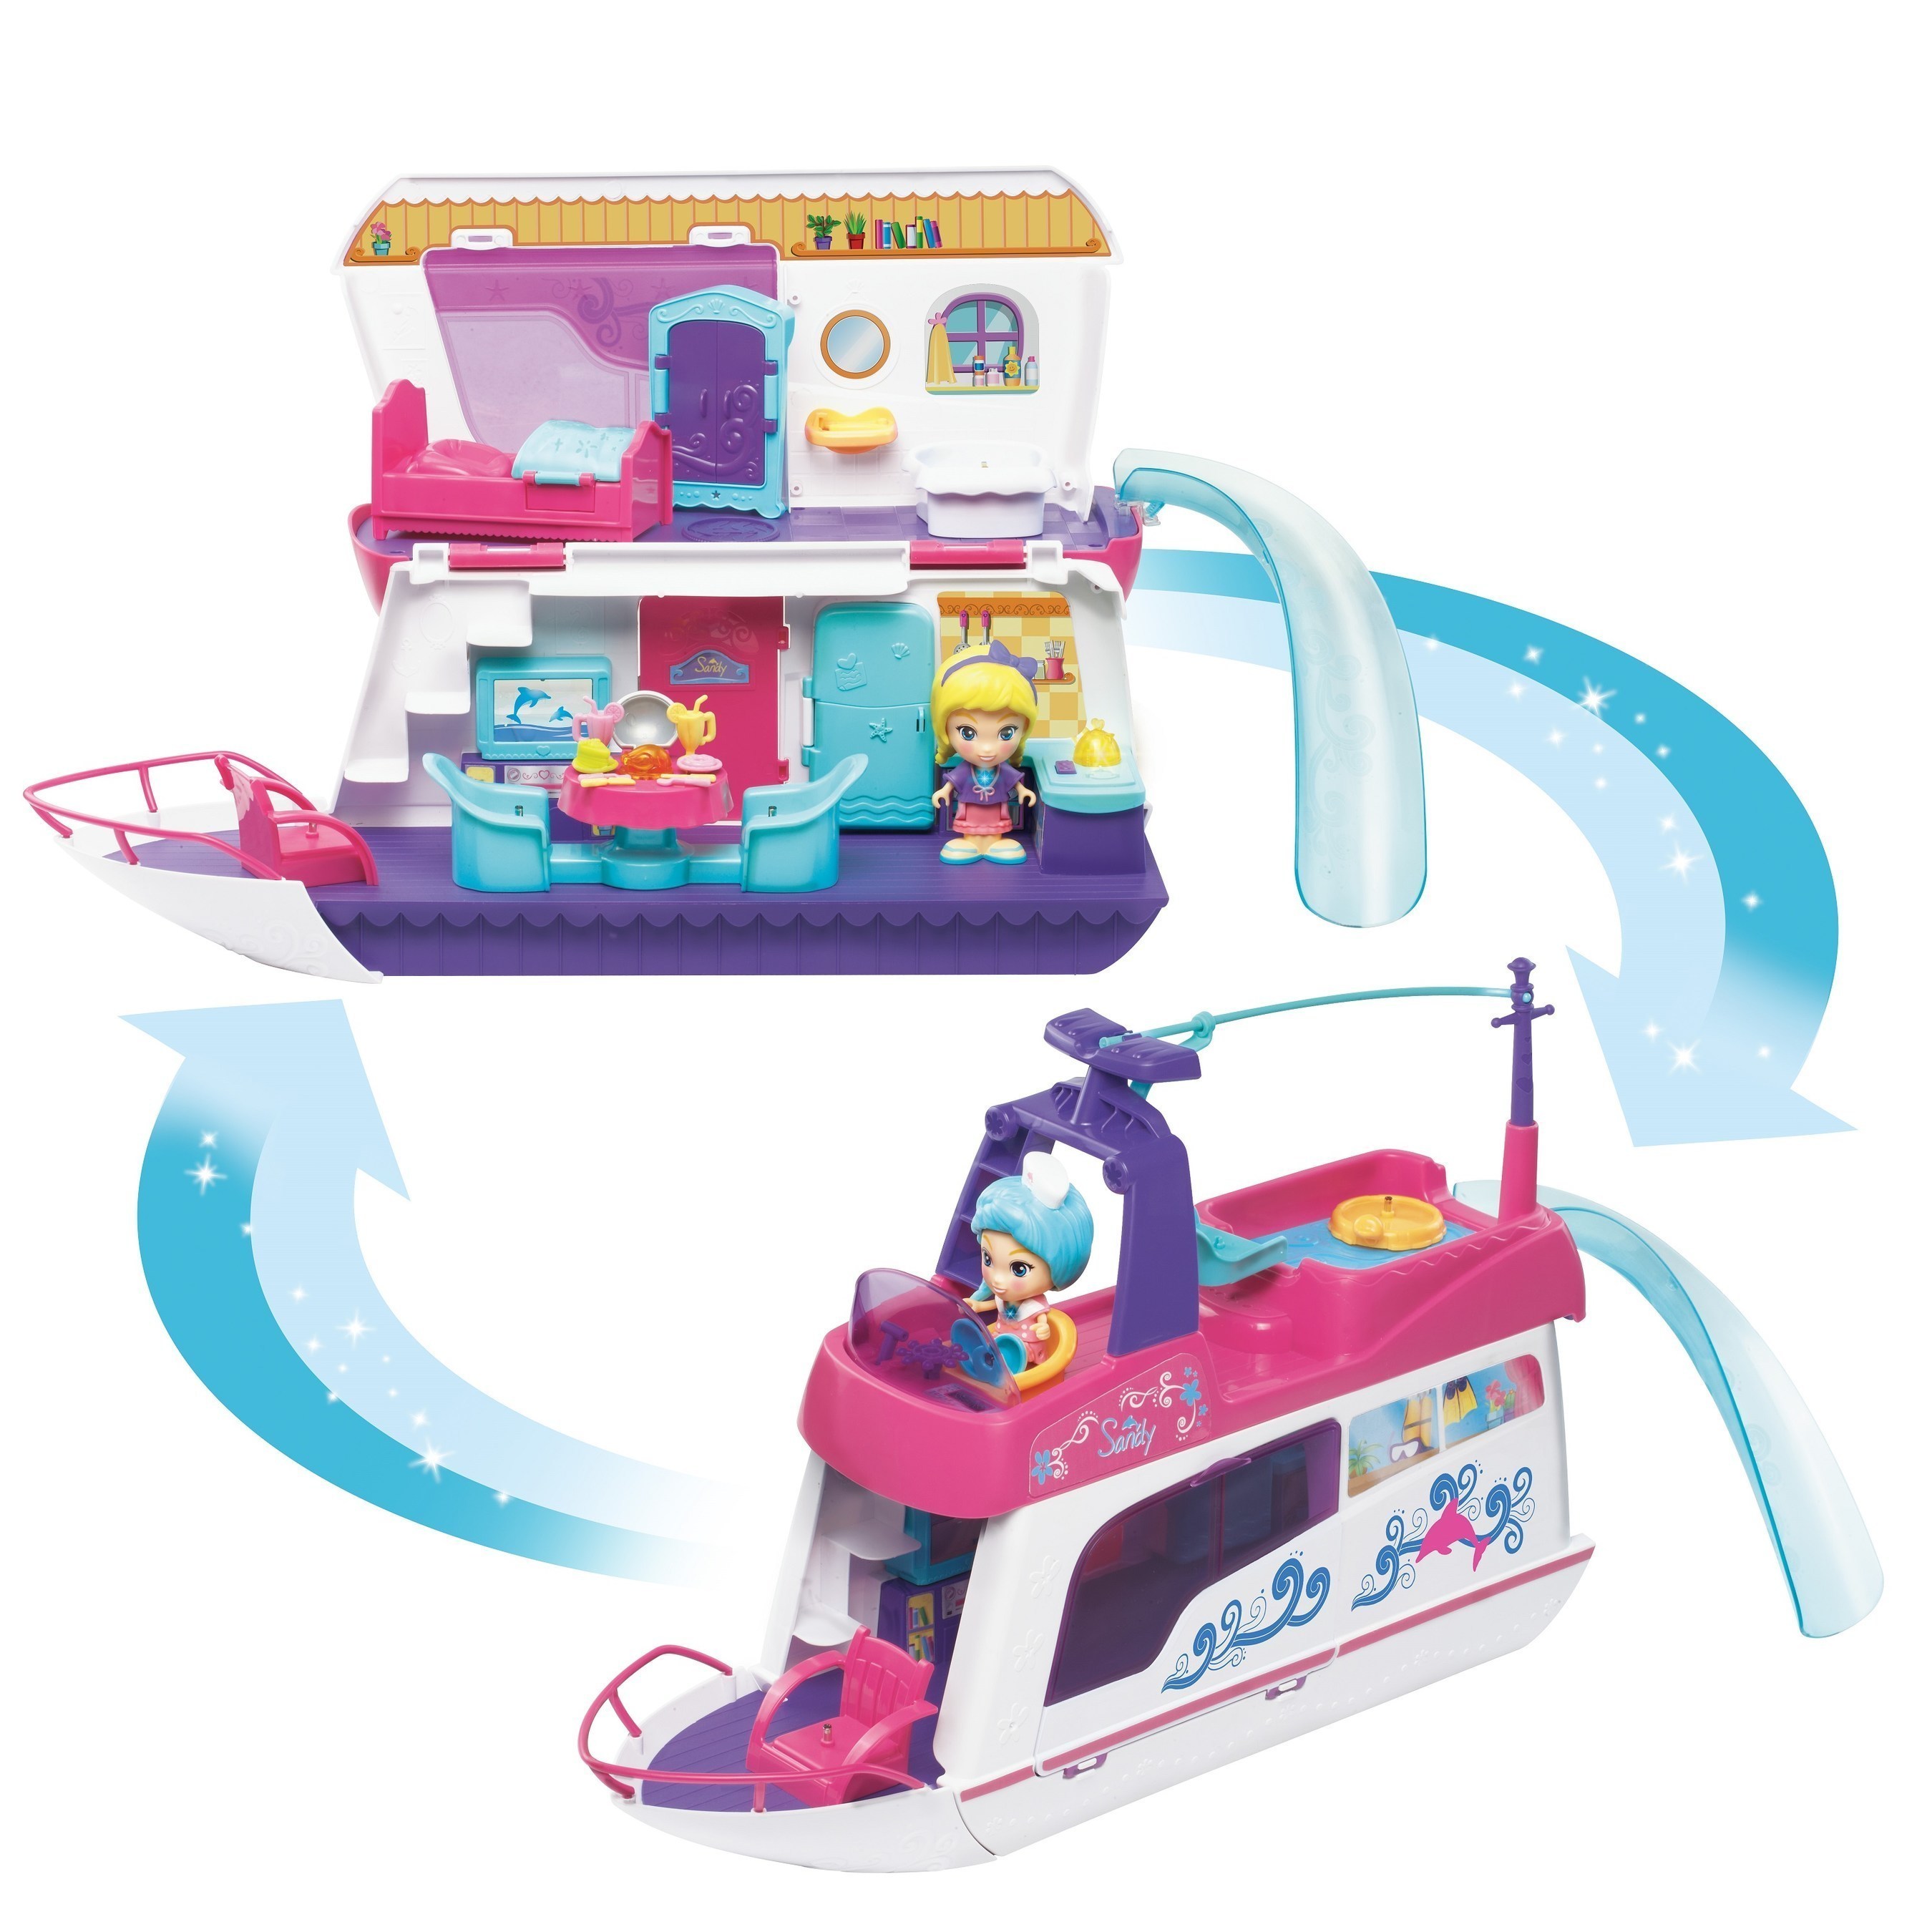 Let Your Dreams Shine!™ Award-Winning Flipsies™ Line by VTech® Available Now